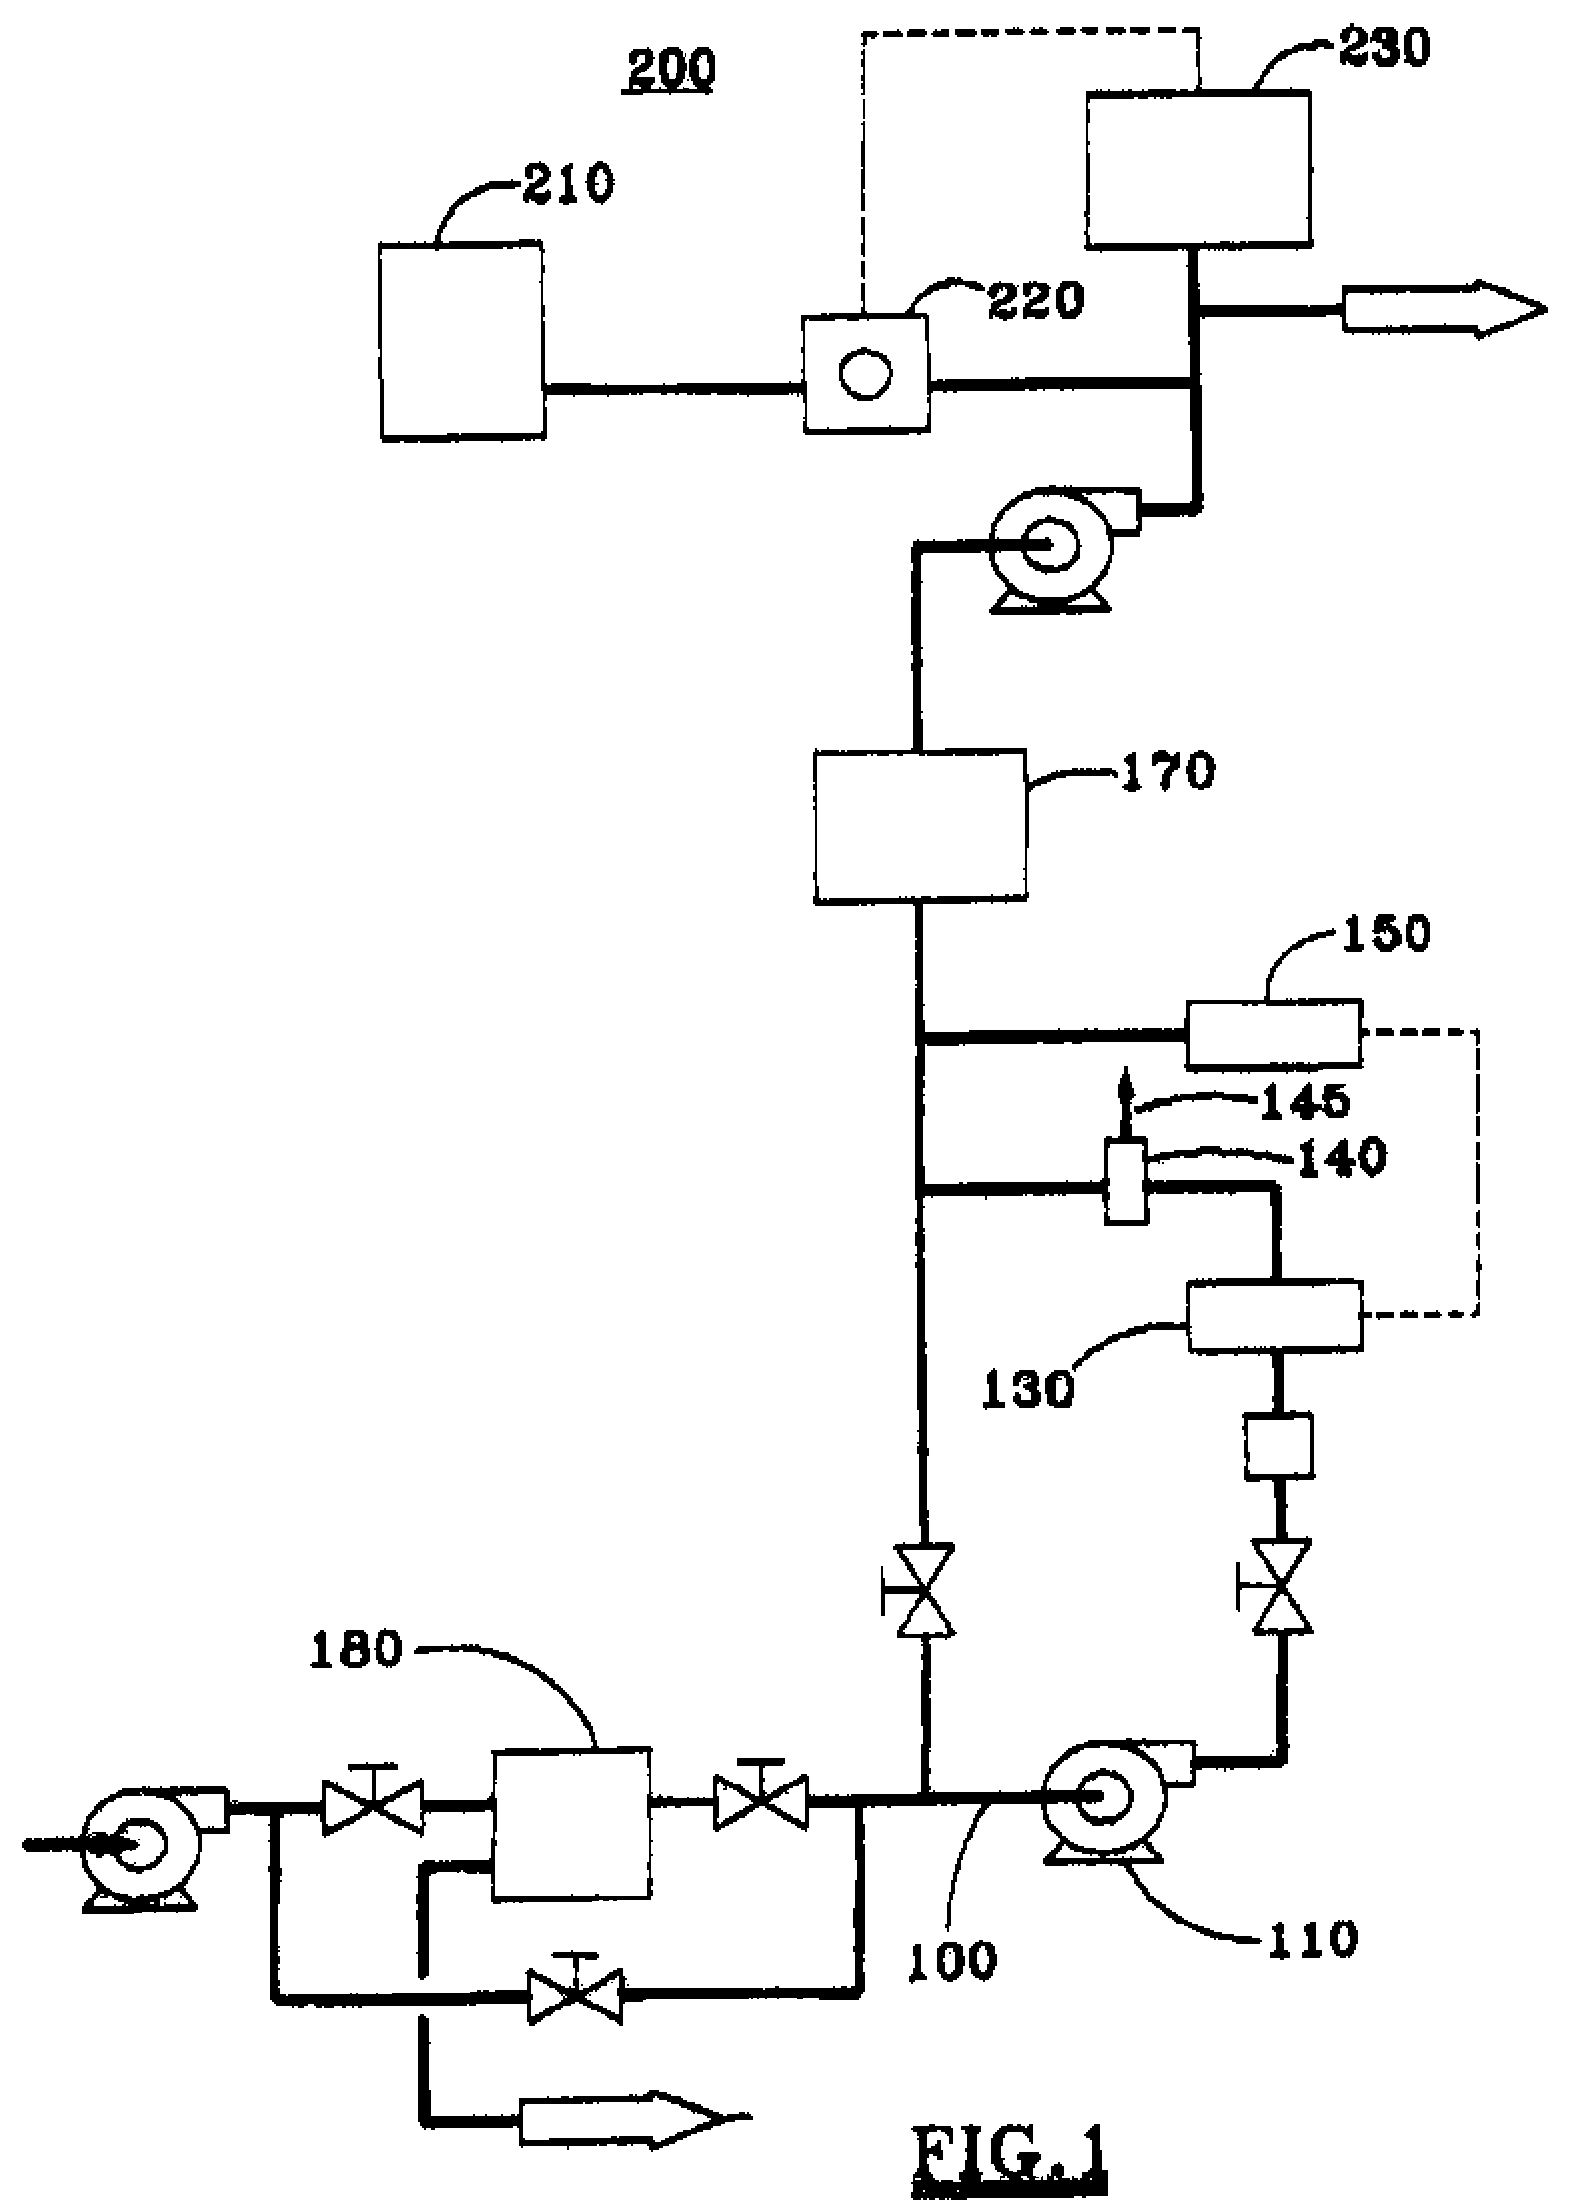 System and method for treatment of ballast water